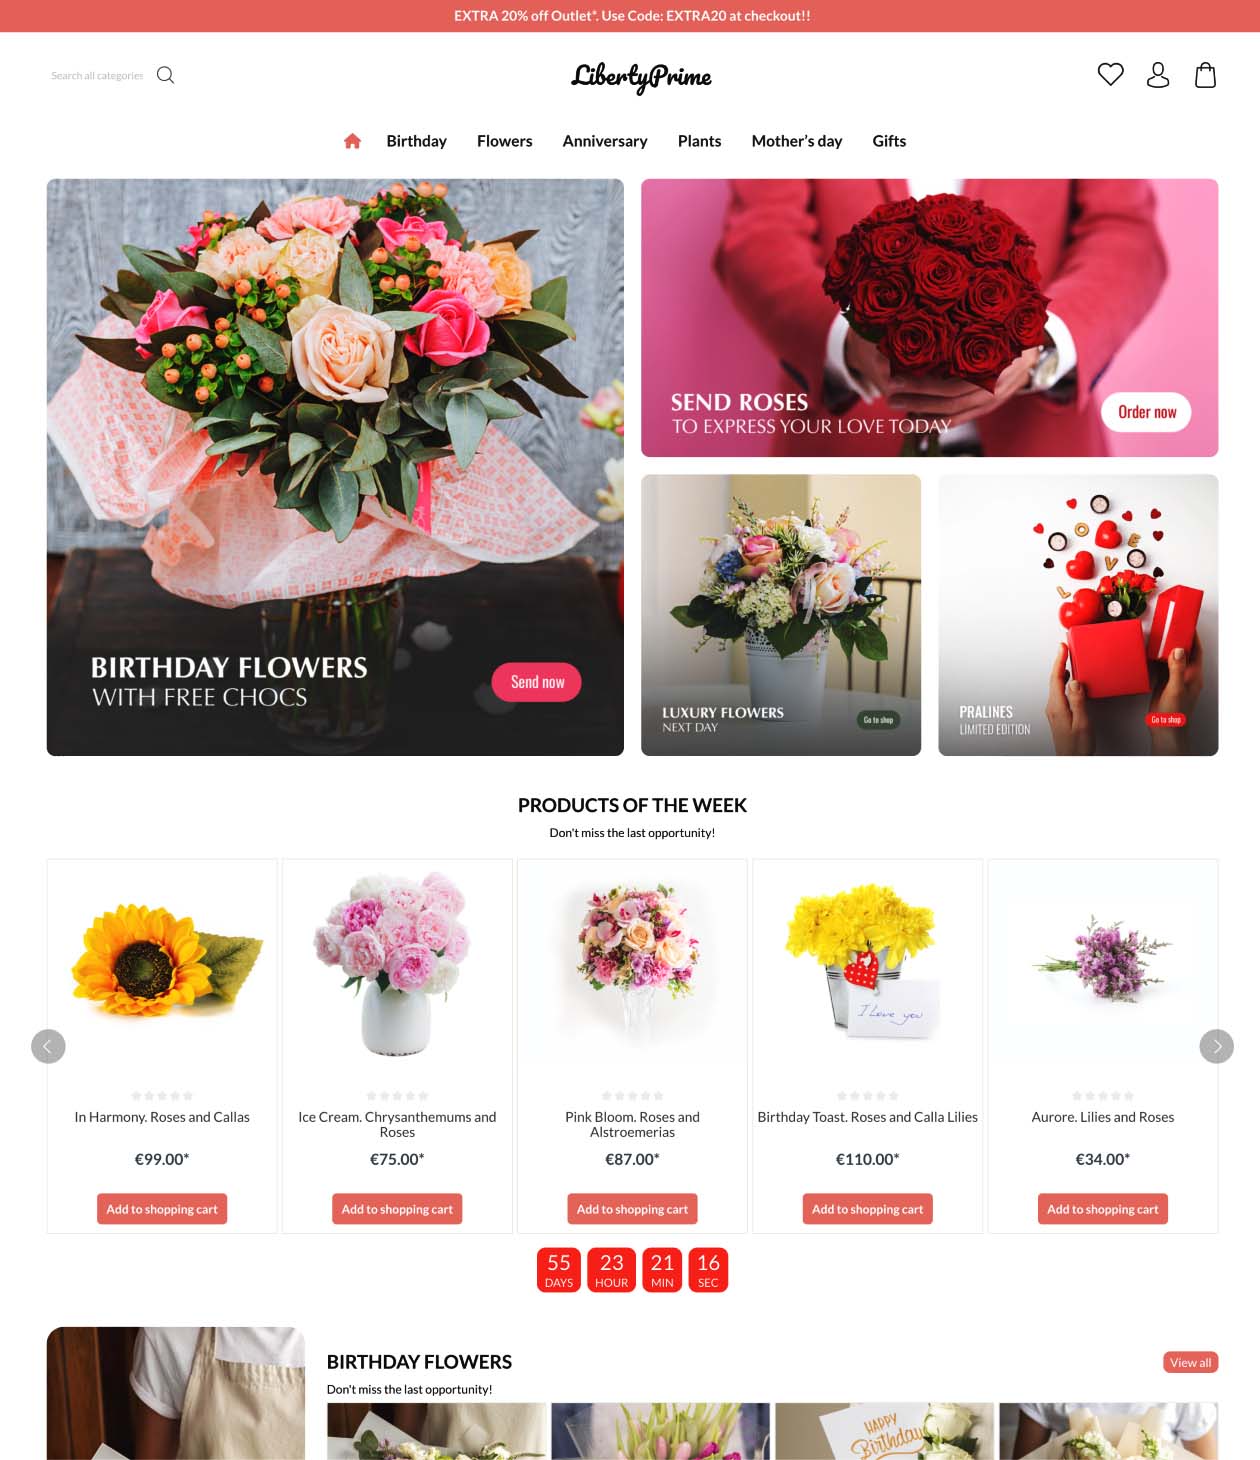 An example of an online flower and gift store.